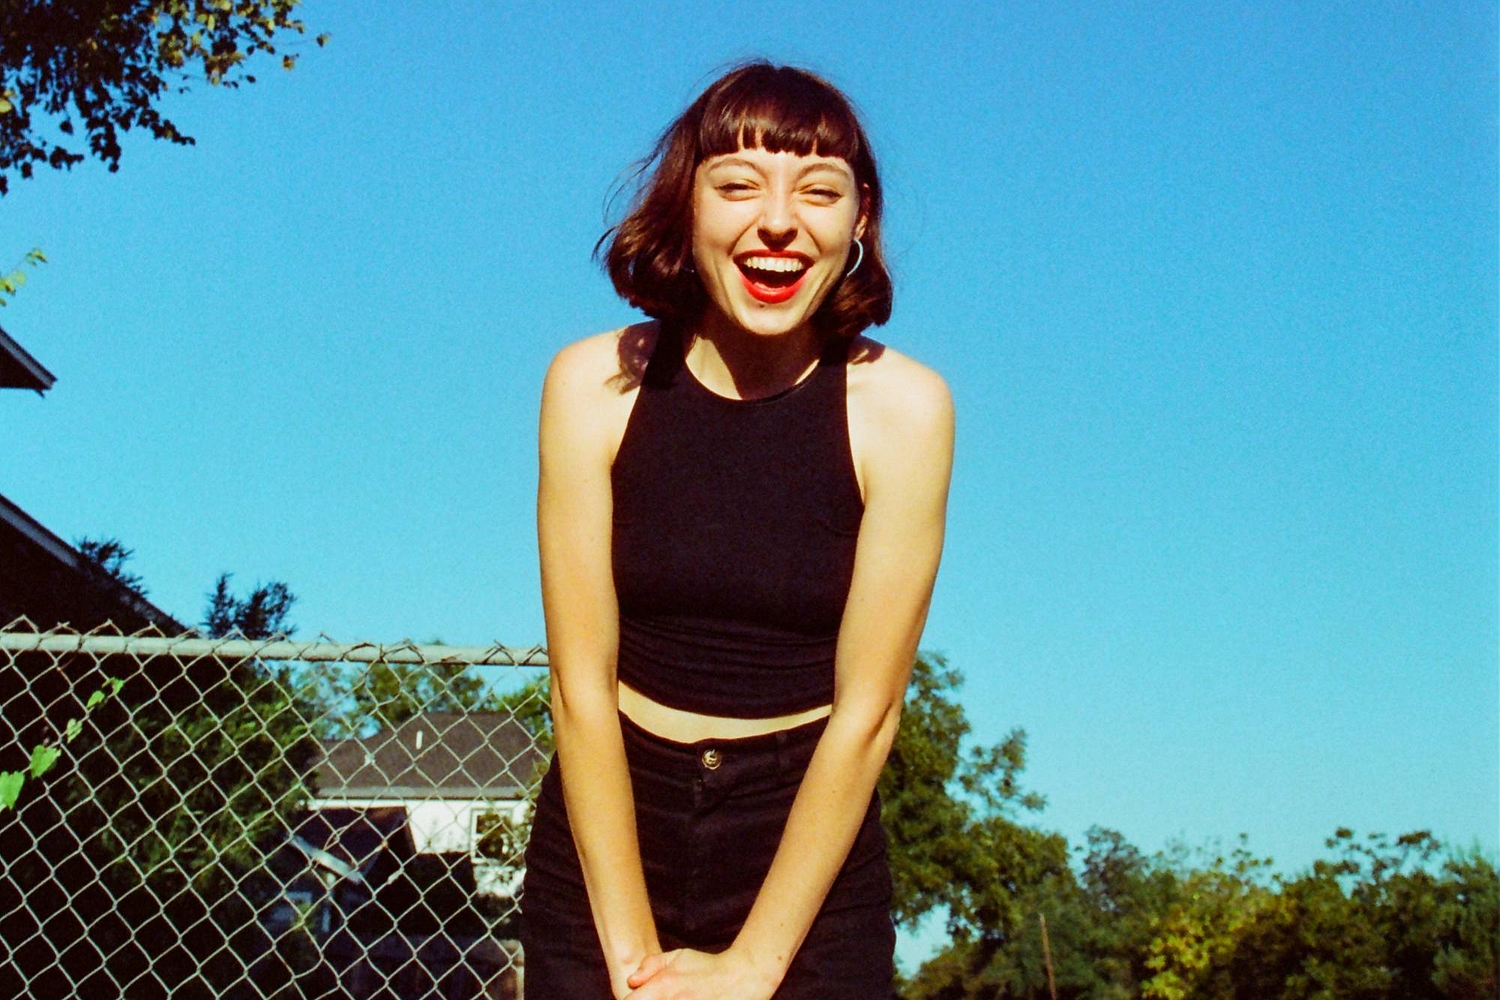 Stella Donnelly has a chaotic Christmas party in ‘Season’s Greetings’ visuals